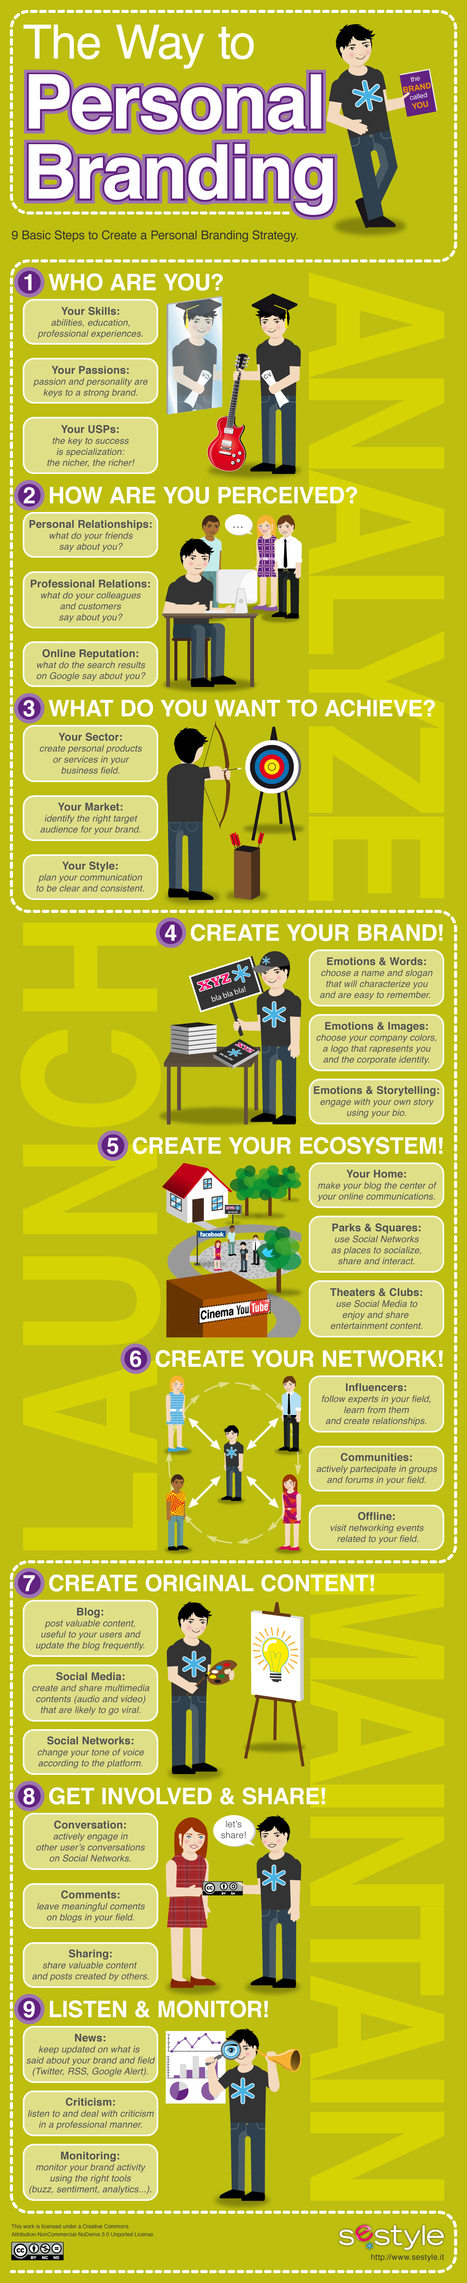 INFOGRAPHIC: Personal Branding in 9 Simple Steps | Thought leadership and online presence | Scoop.it